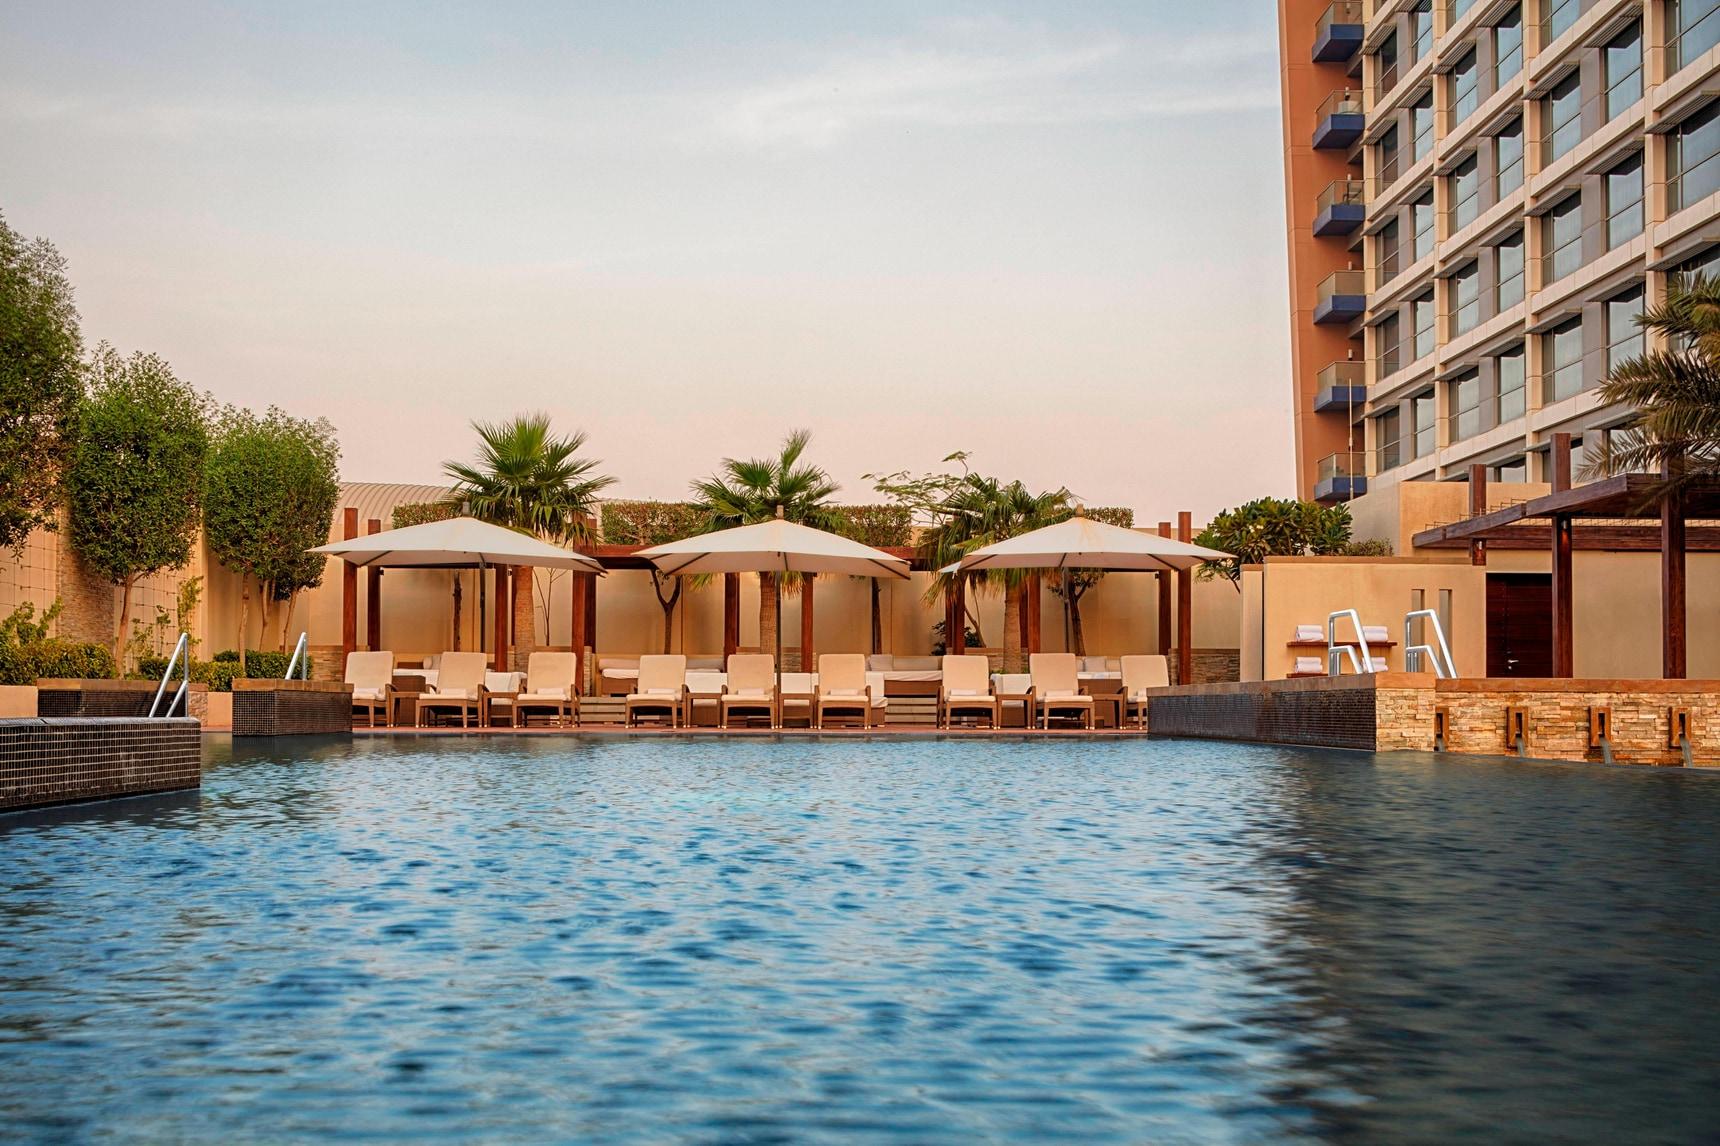 Top 10 Luxury Hotels with a Swimming Pool and Spa in Bahrain